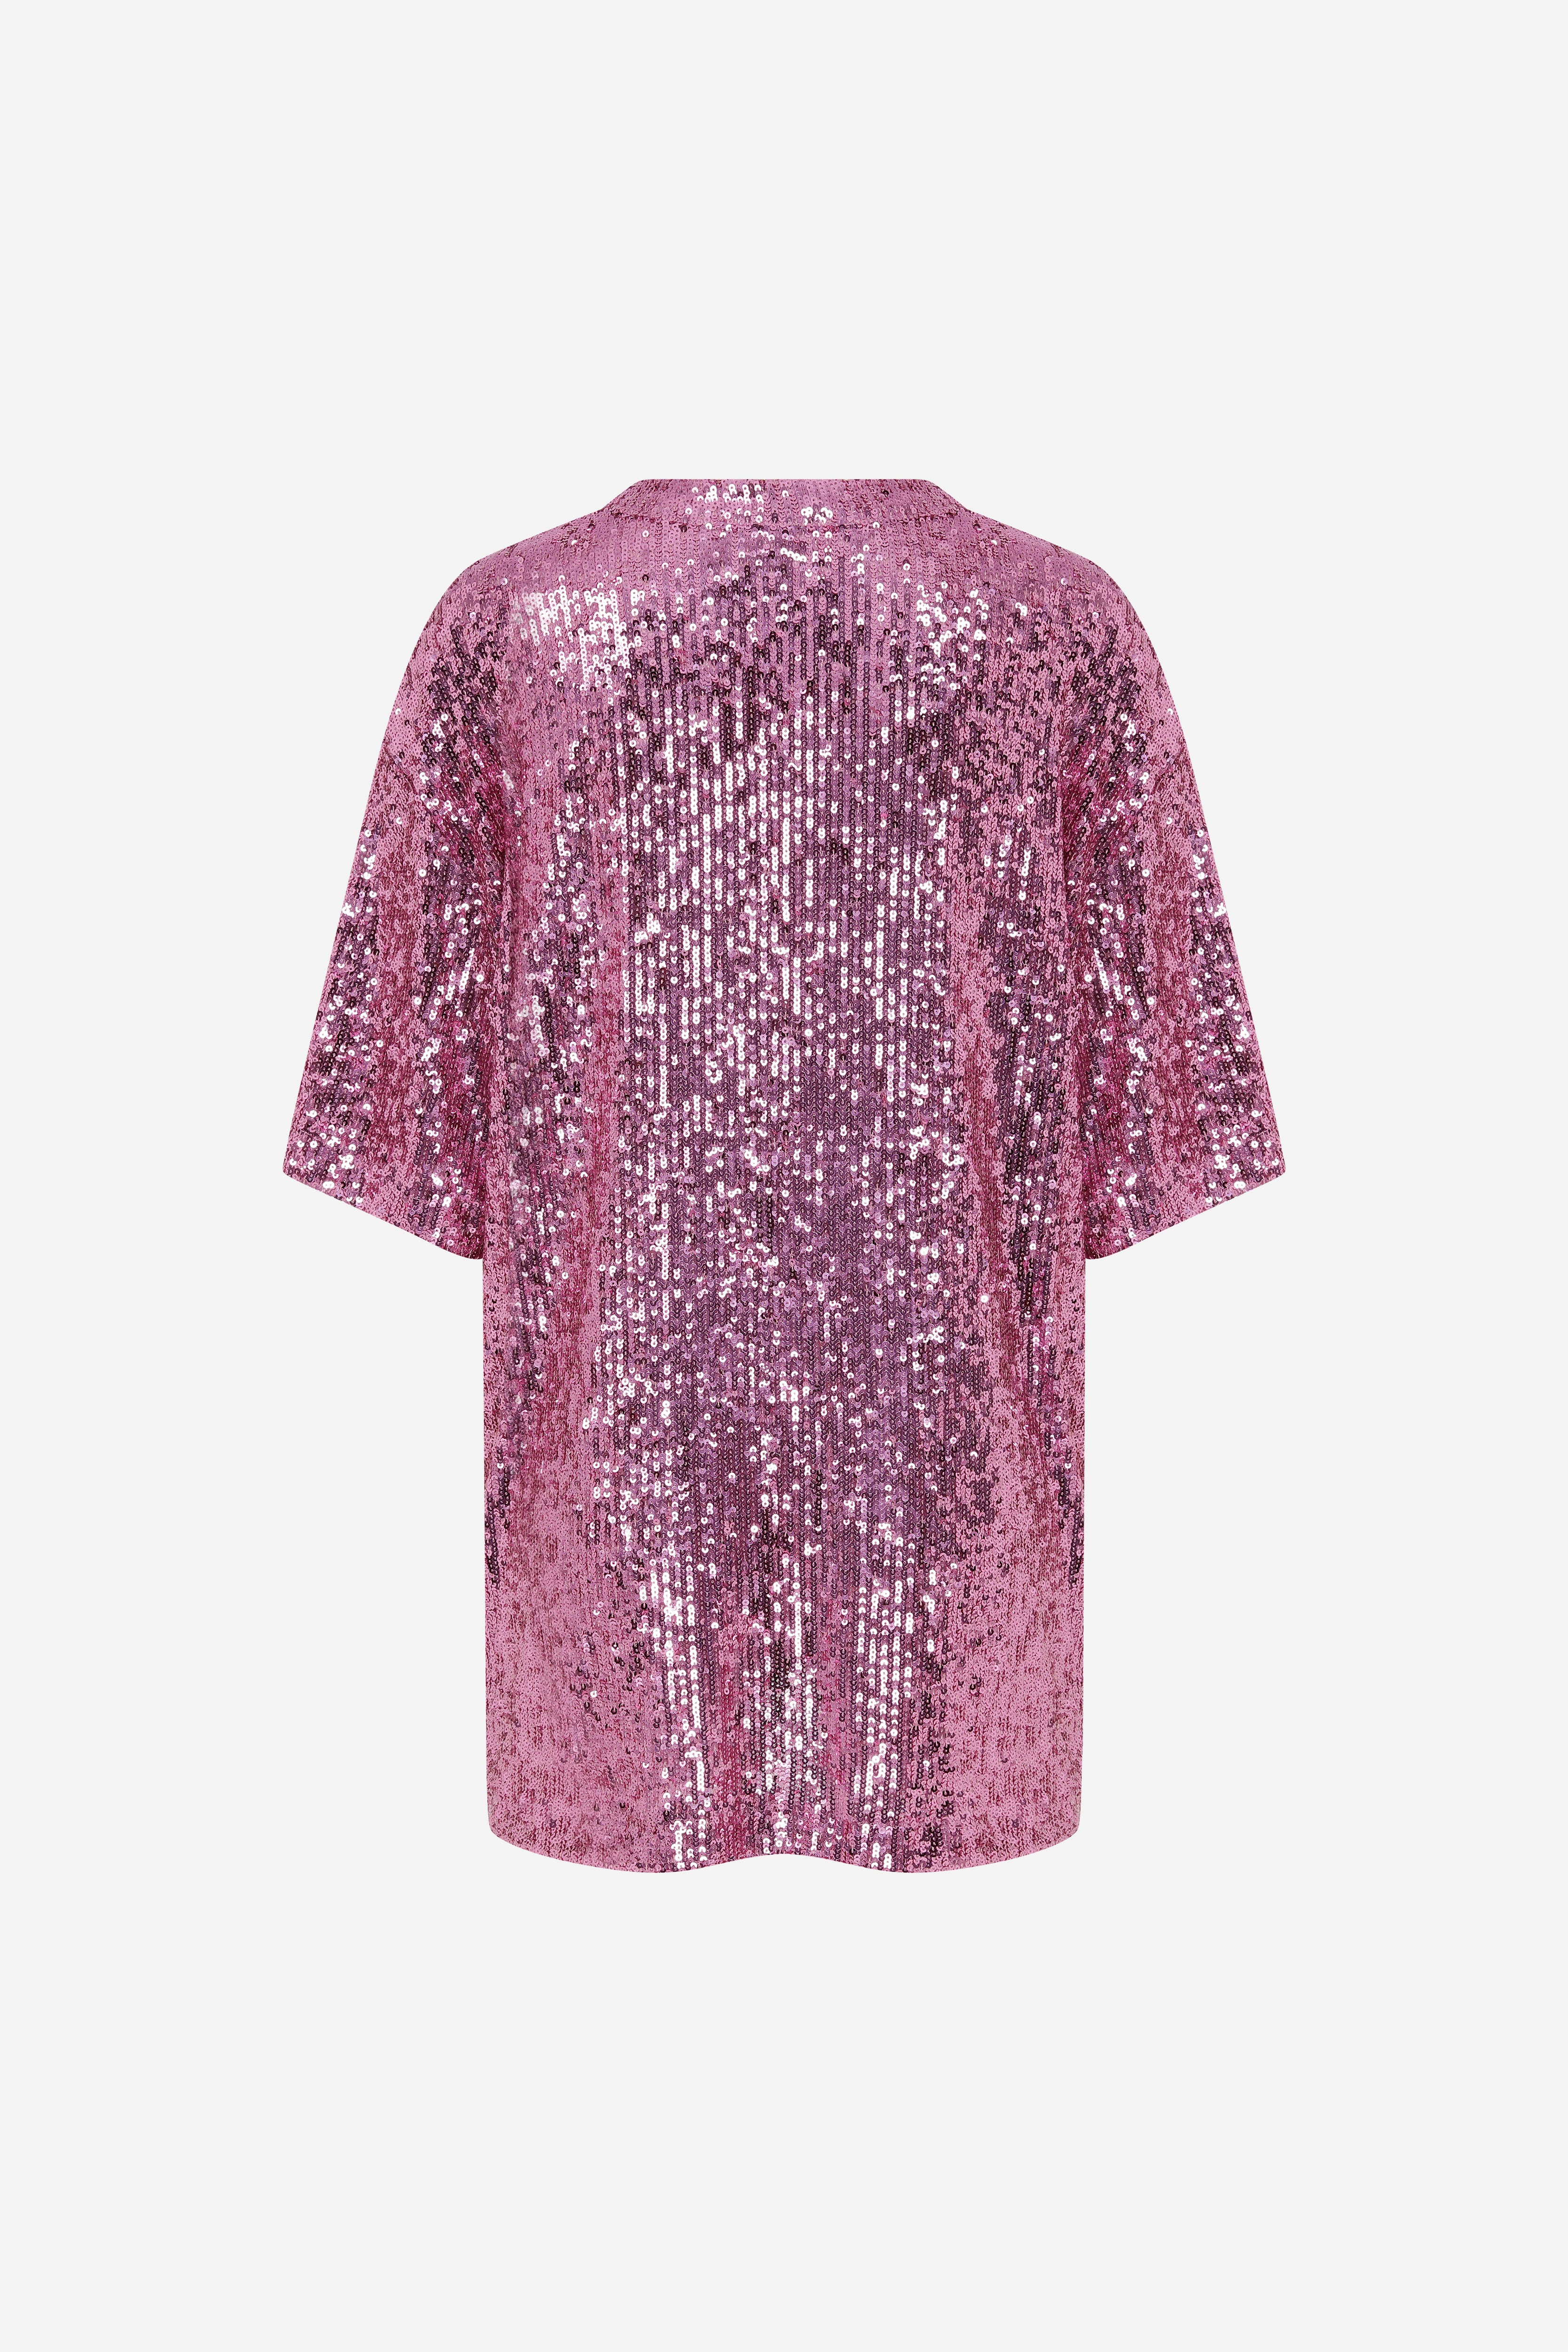 Pavla - Oversized Sequined T-shirt/Dress With 2 Ring Cut-Outs